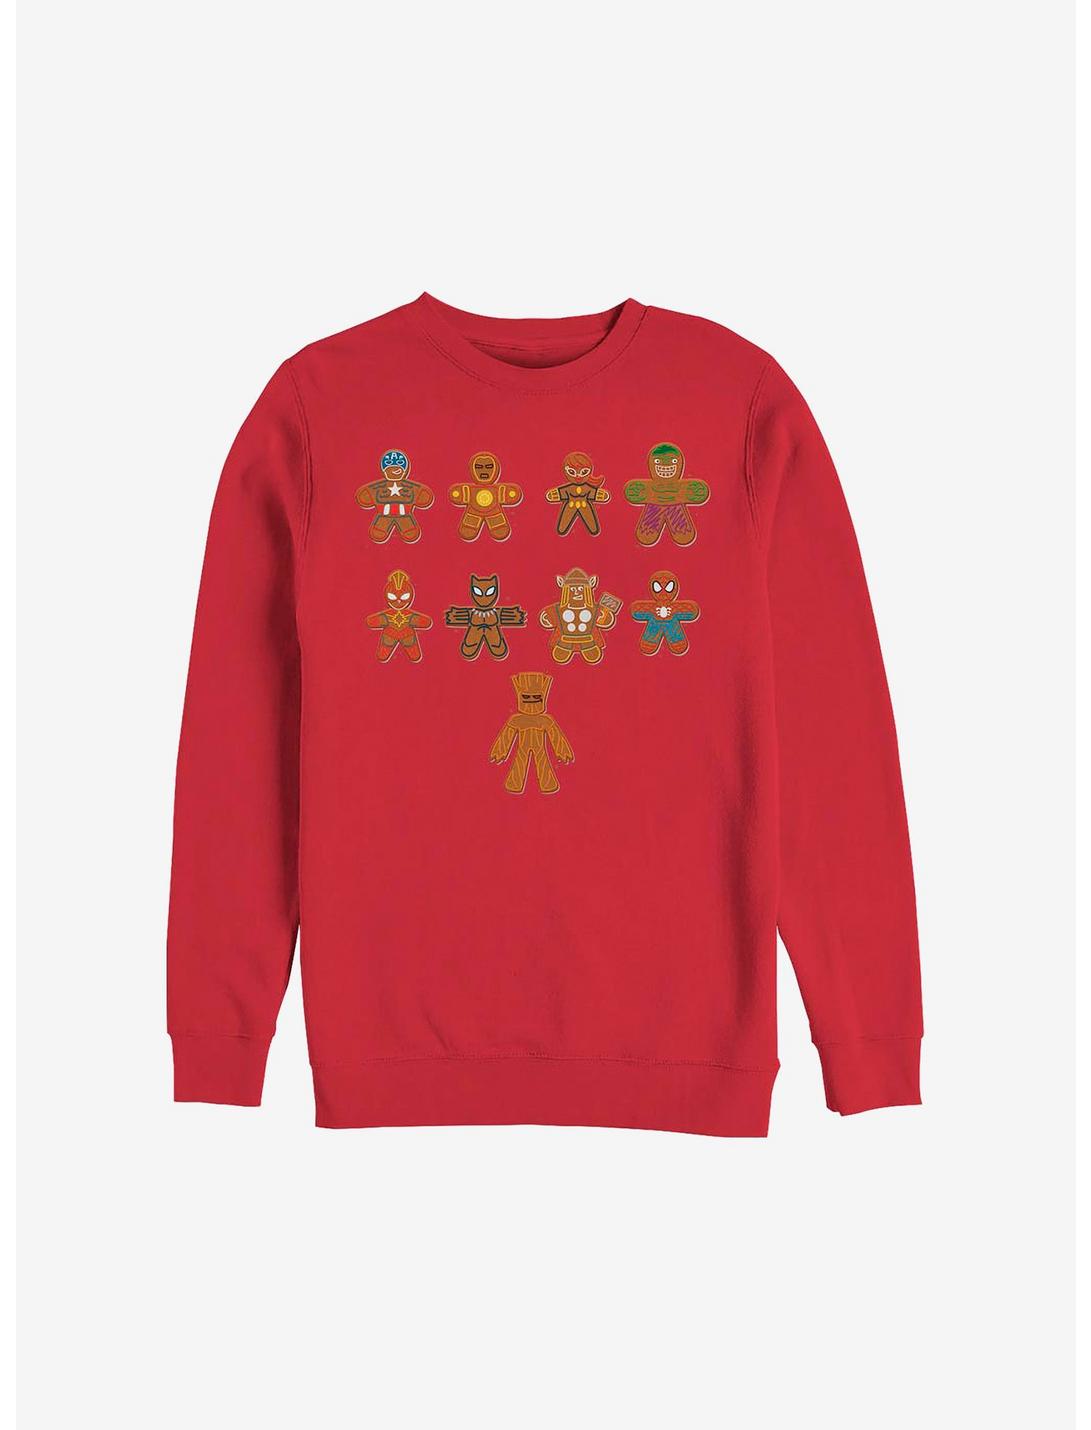 Marvel Avengers Lined Up Cookies Holiday Sweatshirt, RED, hi-res